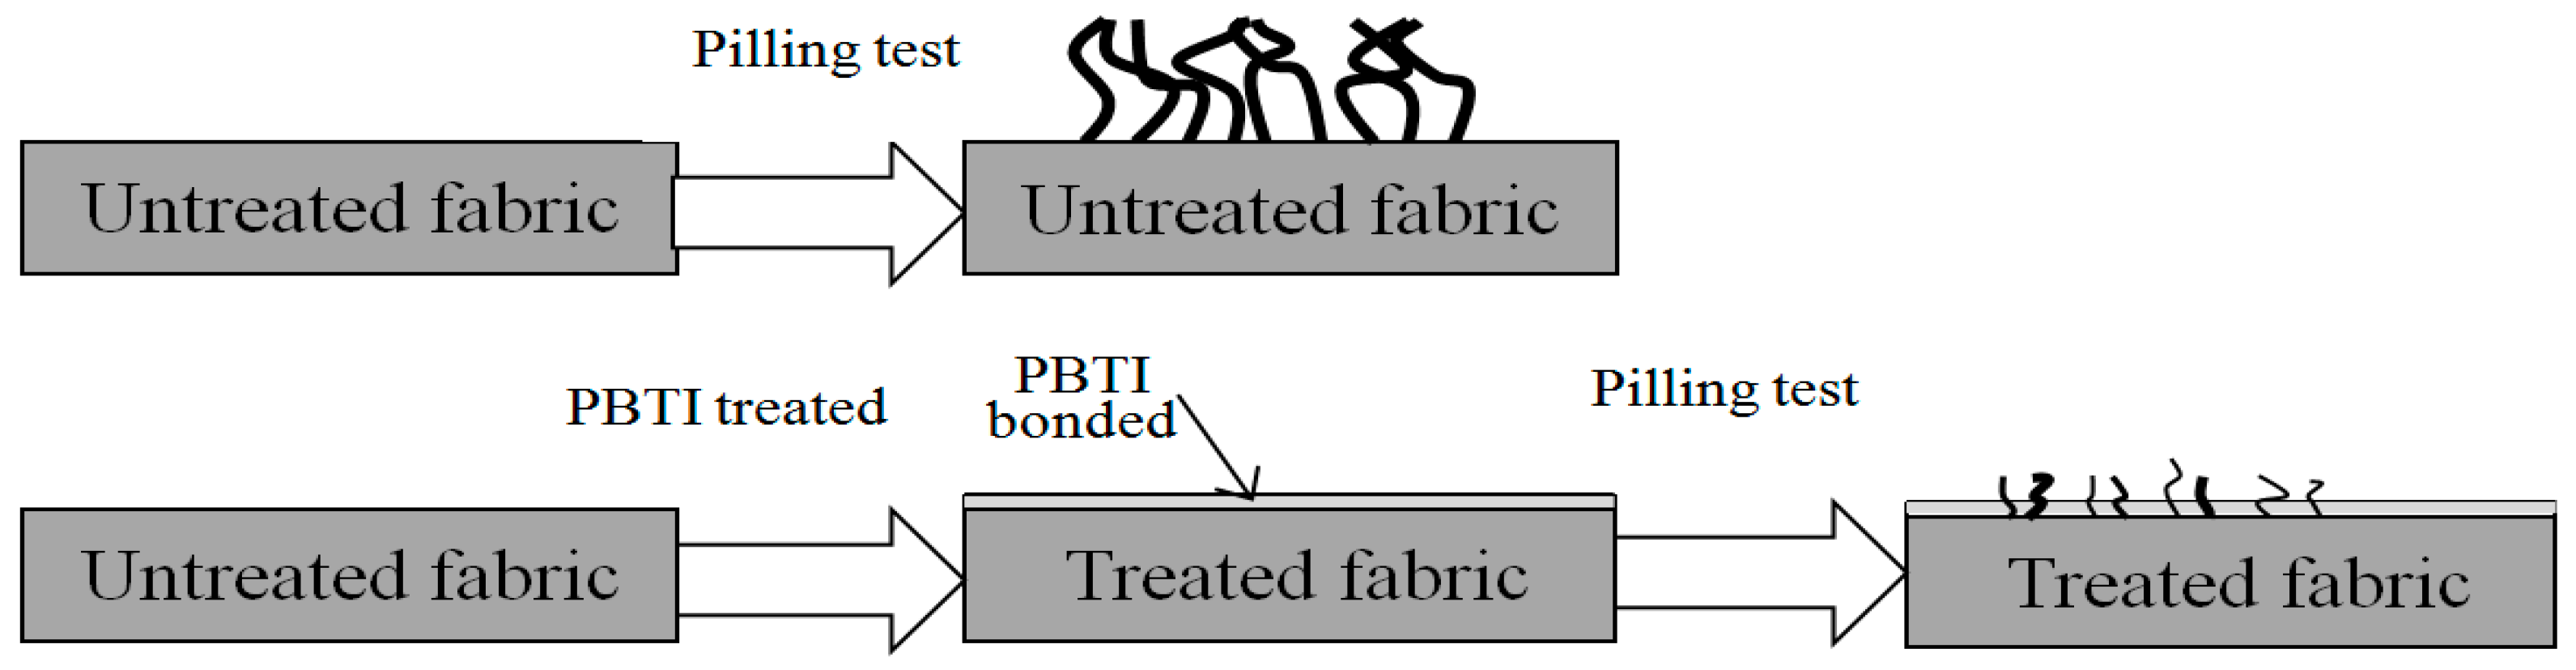 Polymers Free Full Text Preparation And Characterization Of Hot Melt Copolyester Pbti Ultrafine Particles And Their Effect On The Anti Pilling Performance Of Polyester Cotton Fabrics Html